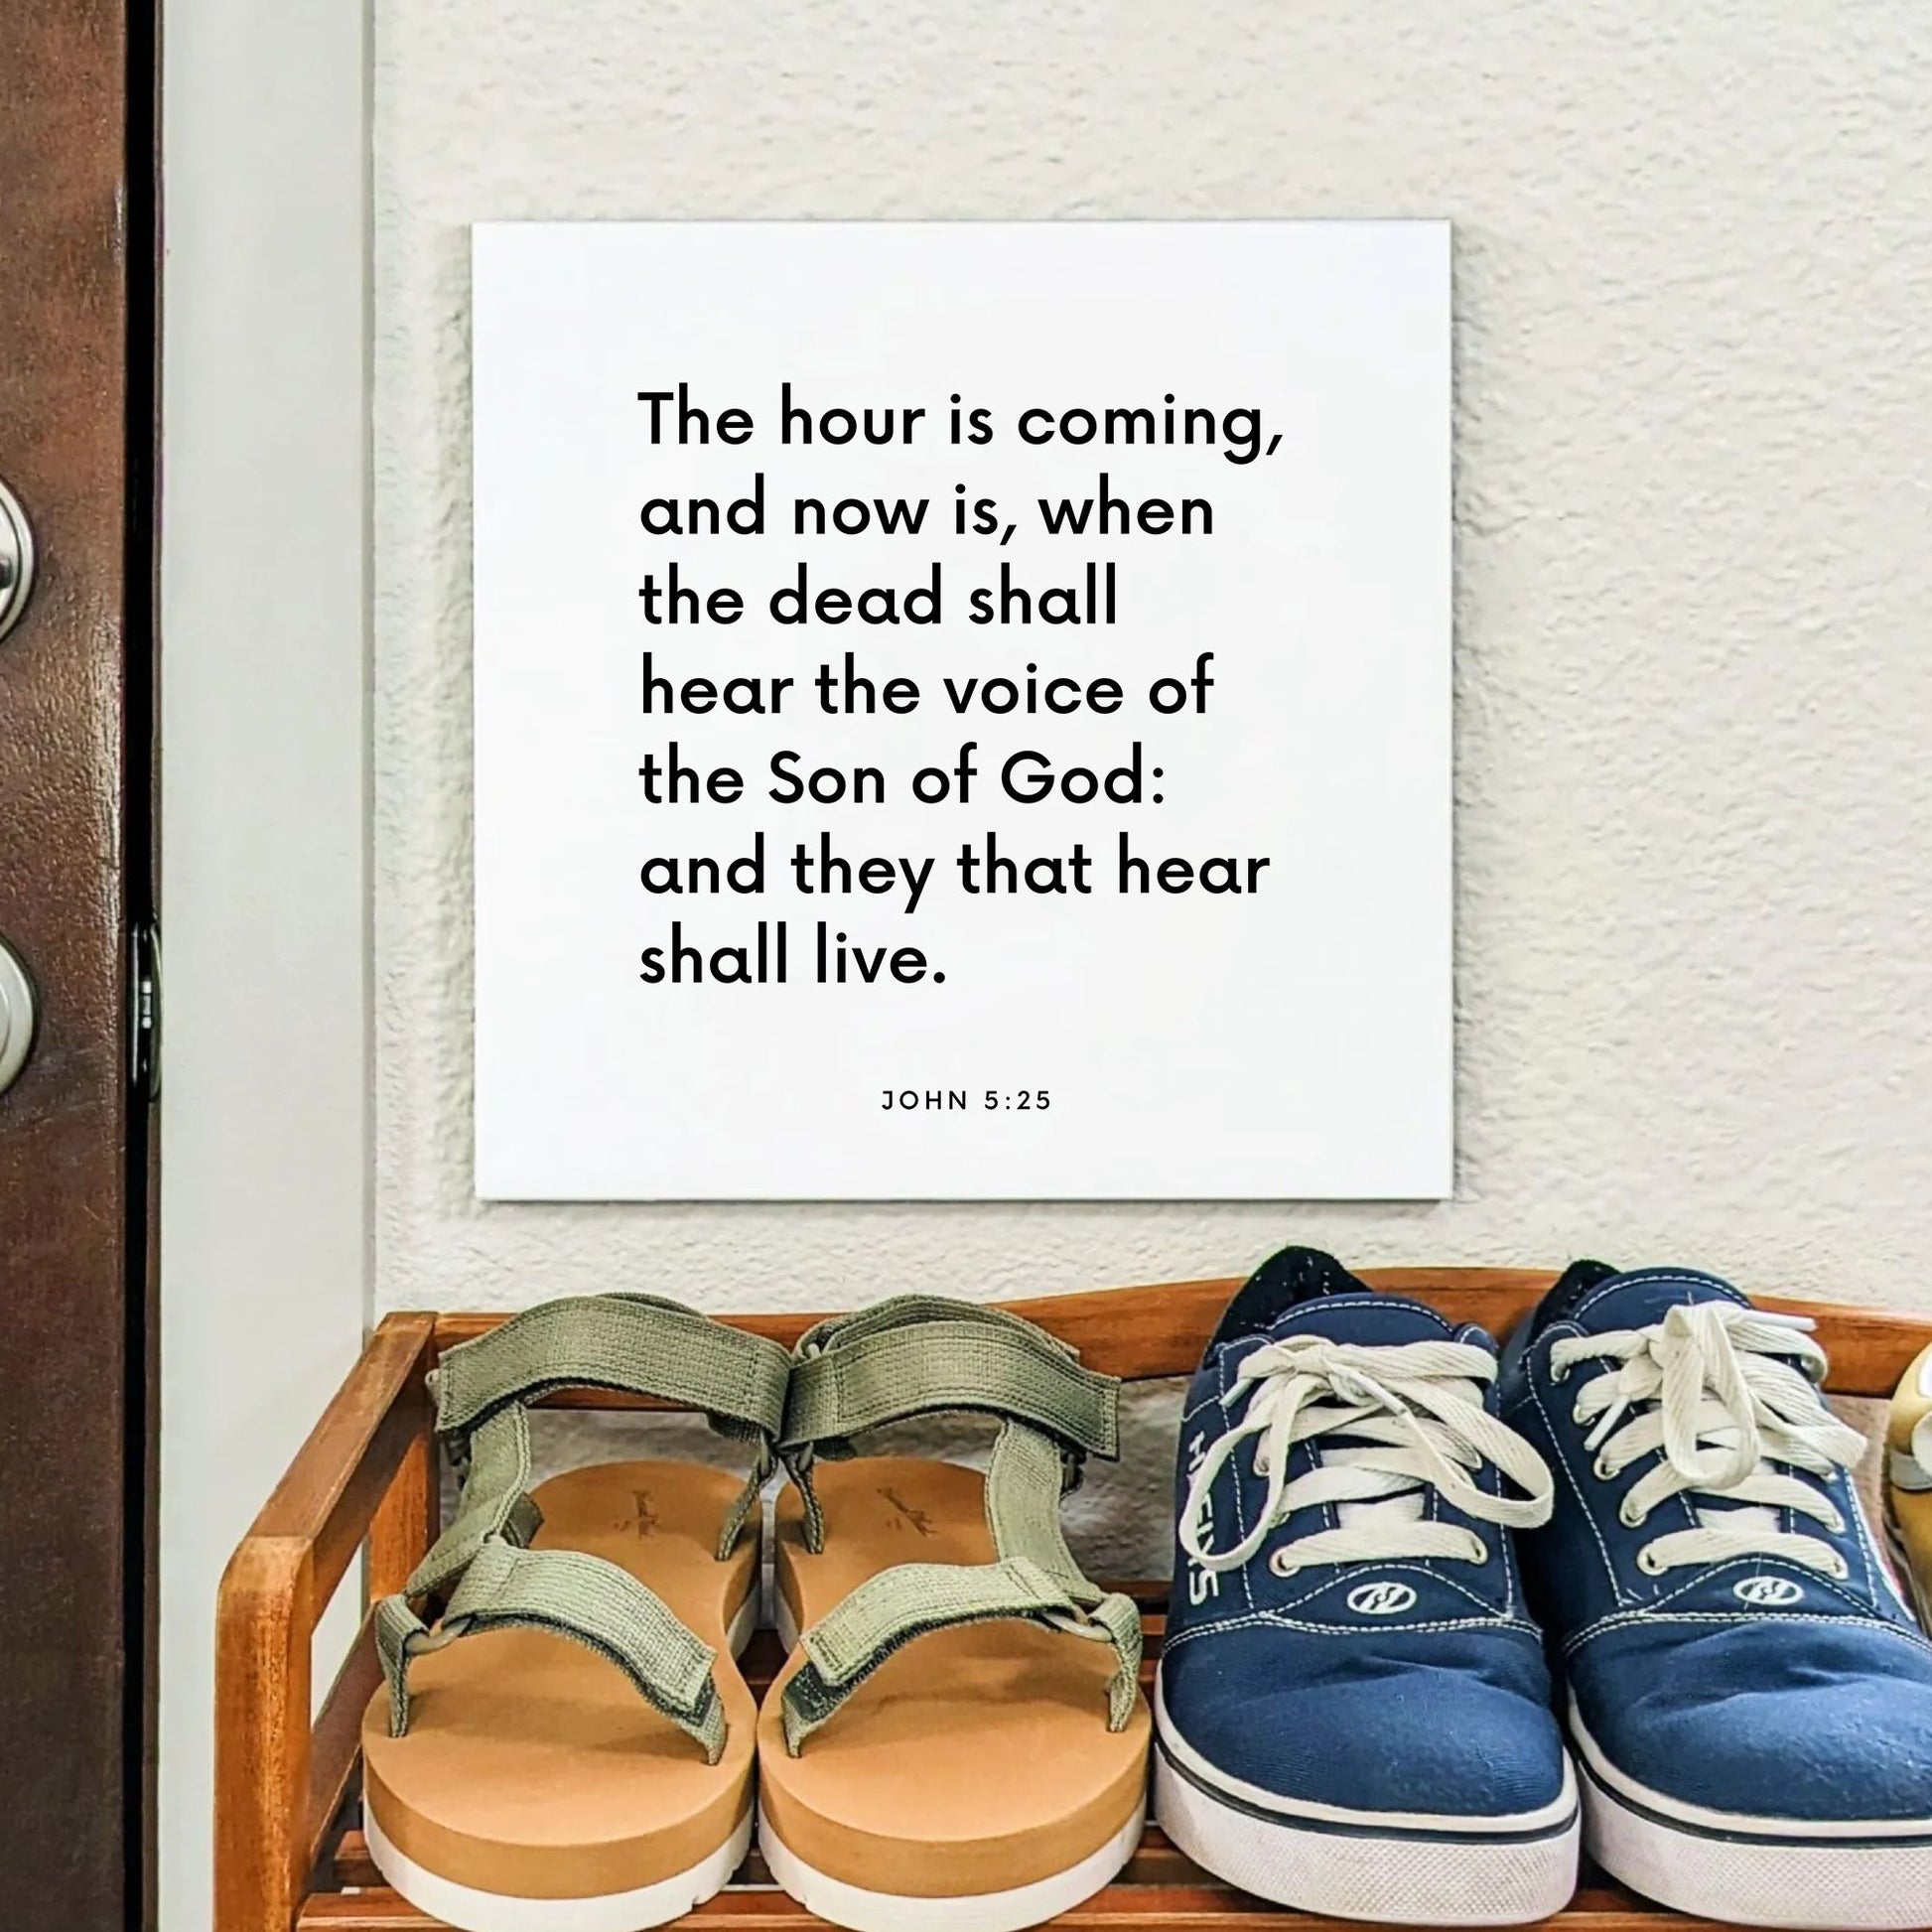 Shoes mouting of the scripture tile for John 5:25 - "The dead shall hear the voice of the Son of God"